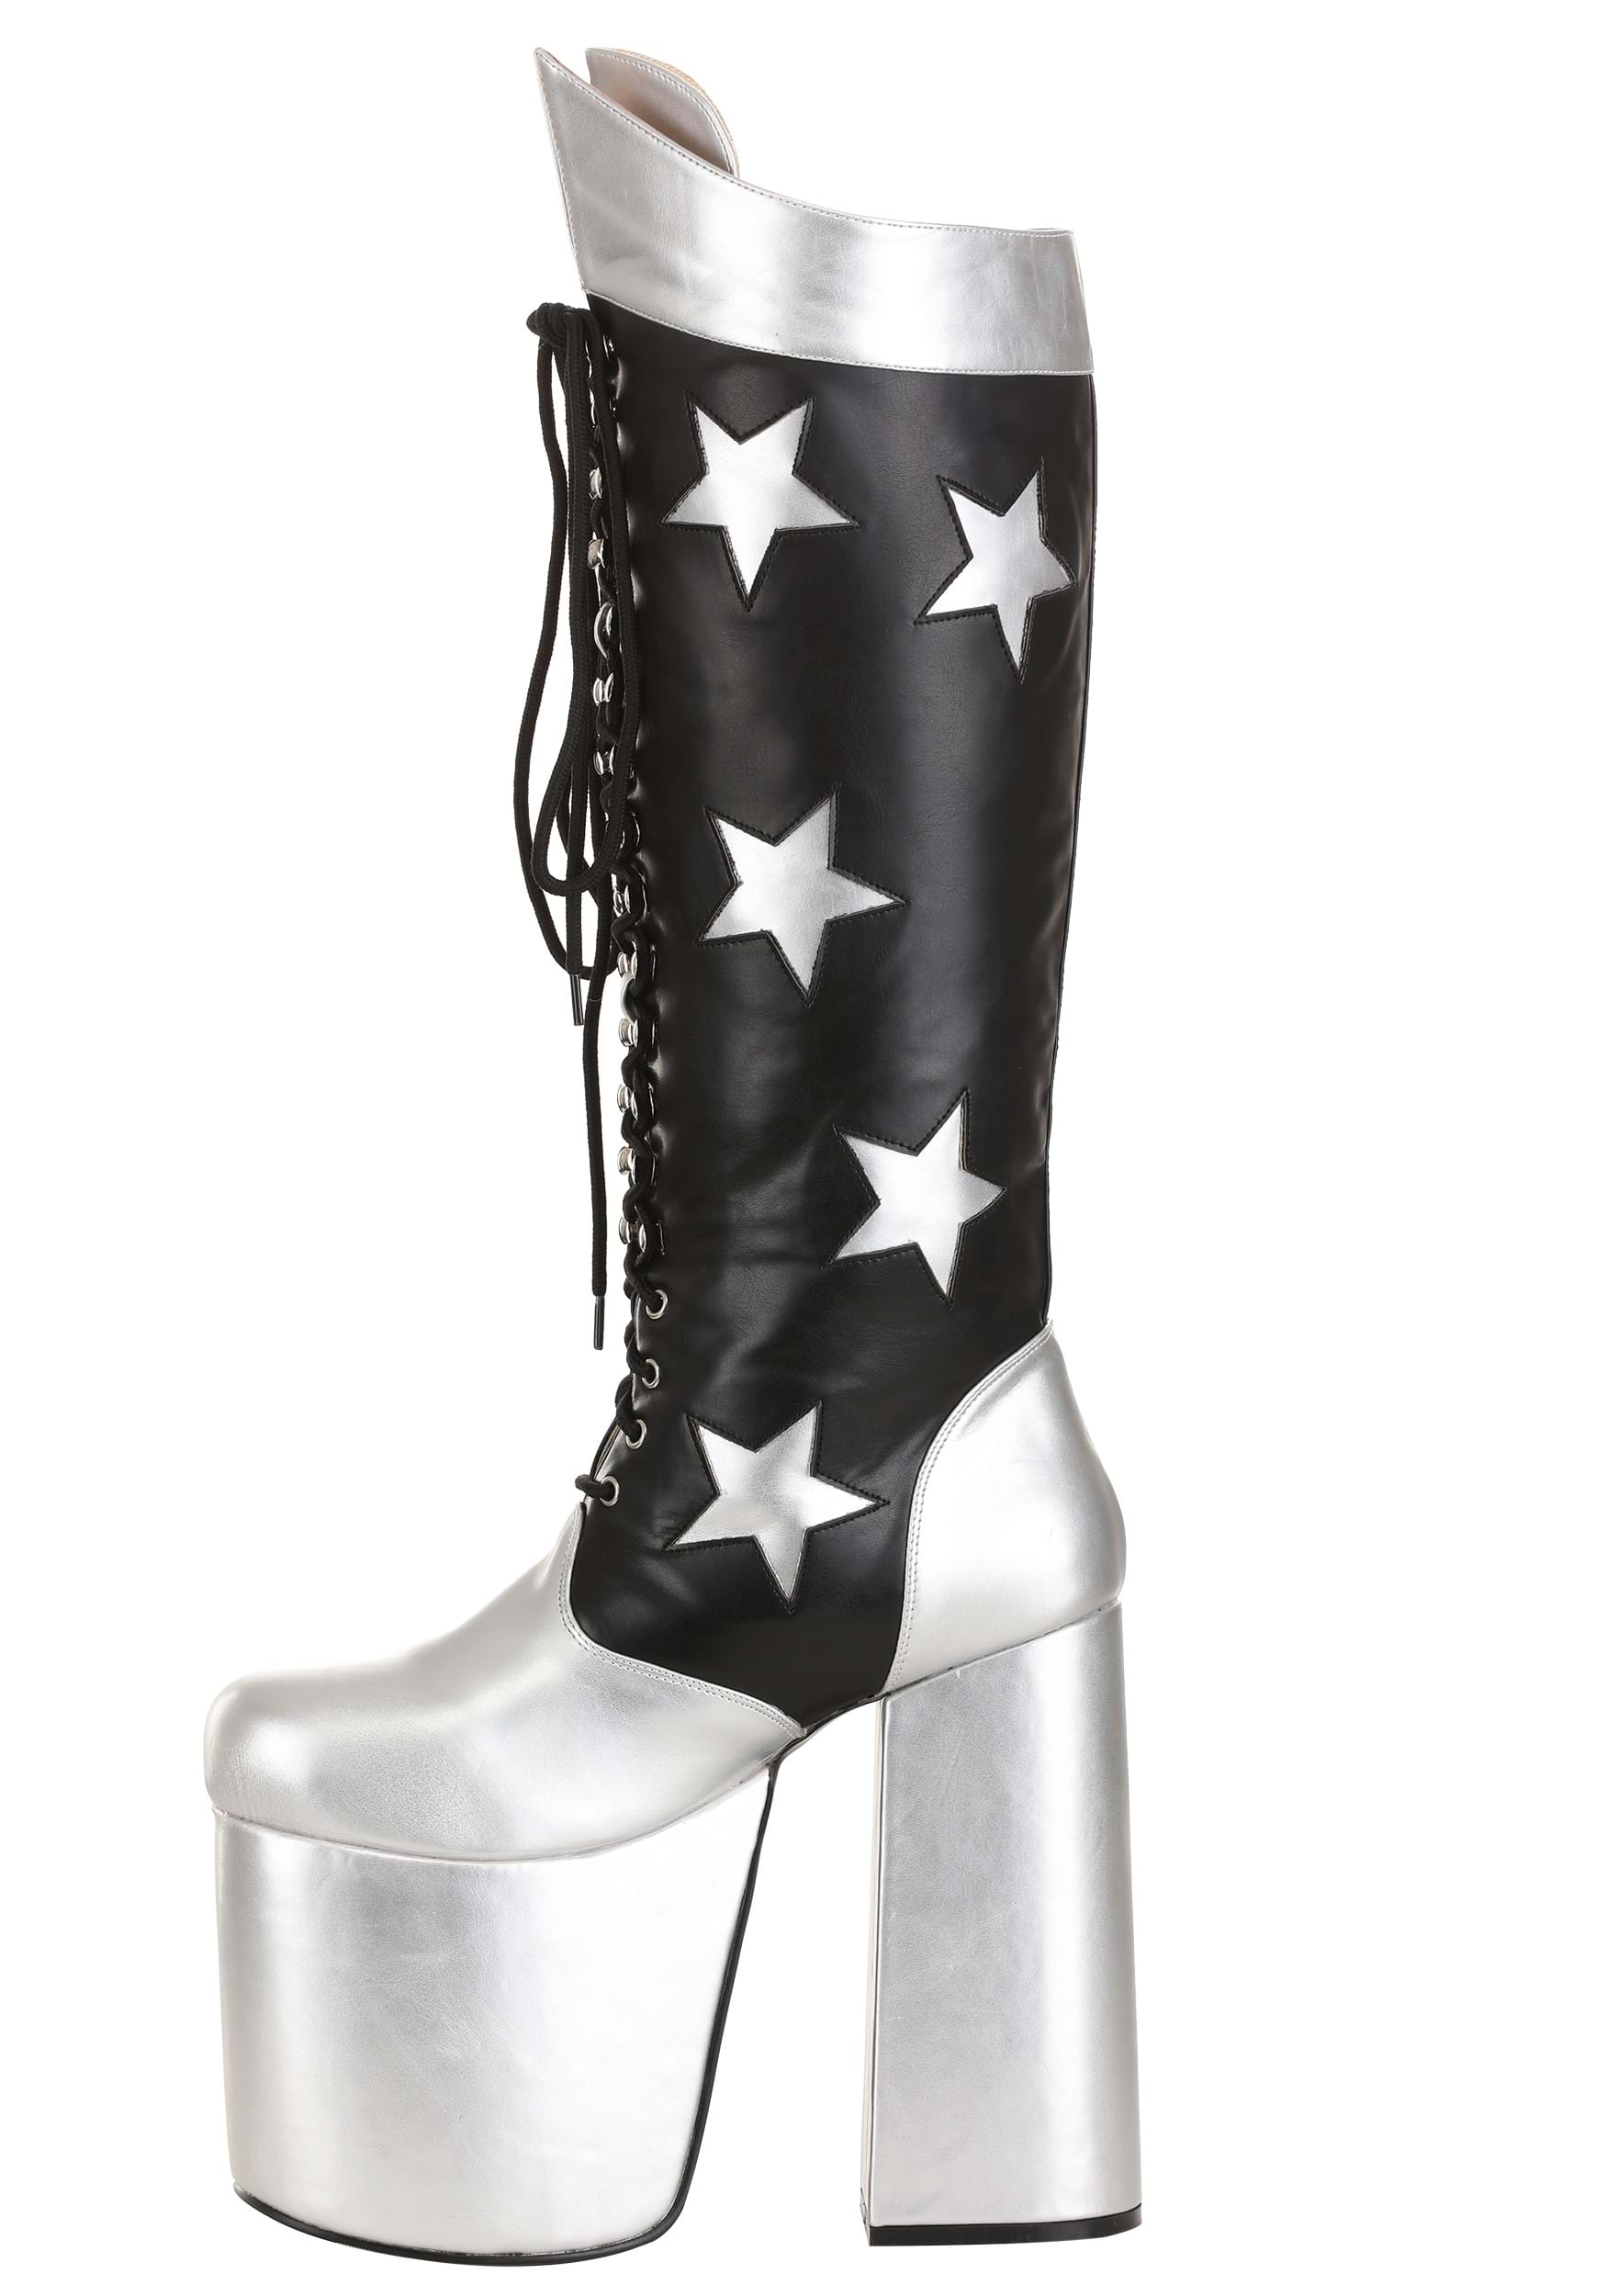 KISS Starchild Boots , Exclusive Fancy Dress Costume Boots